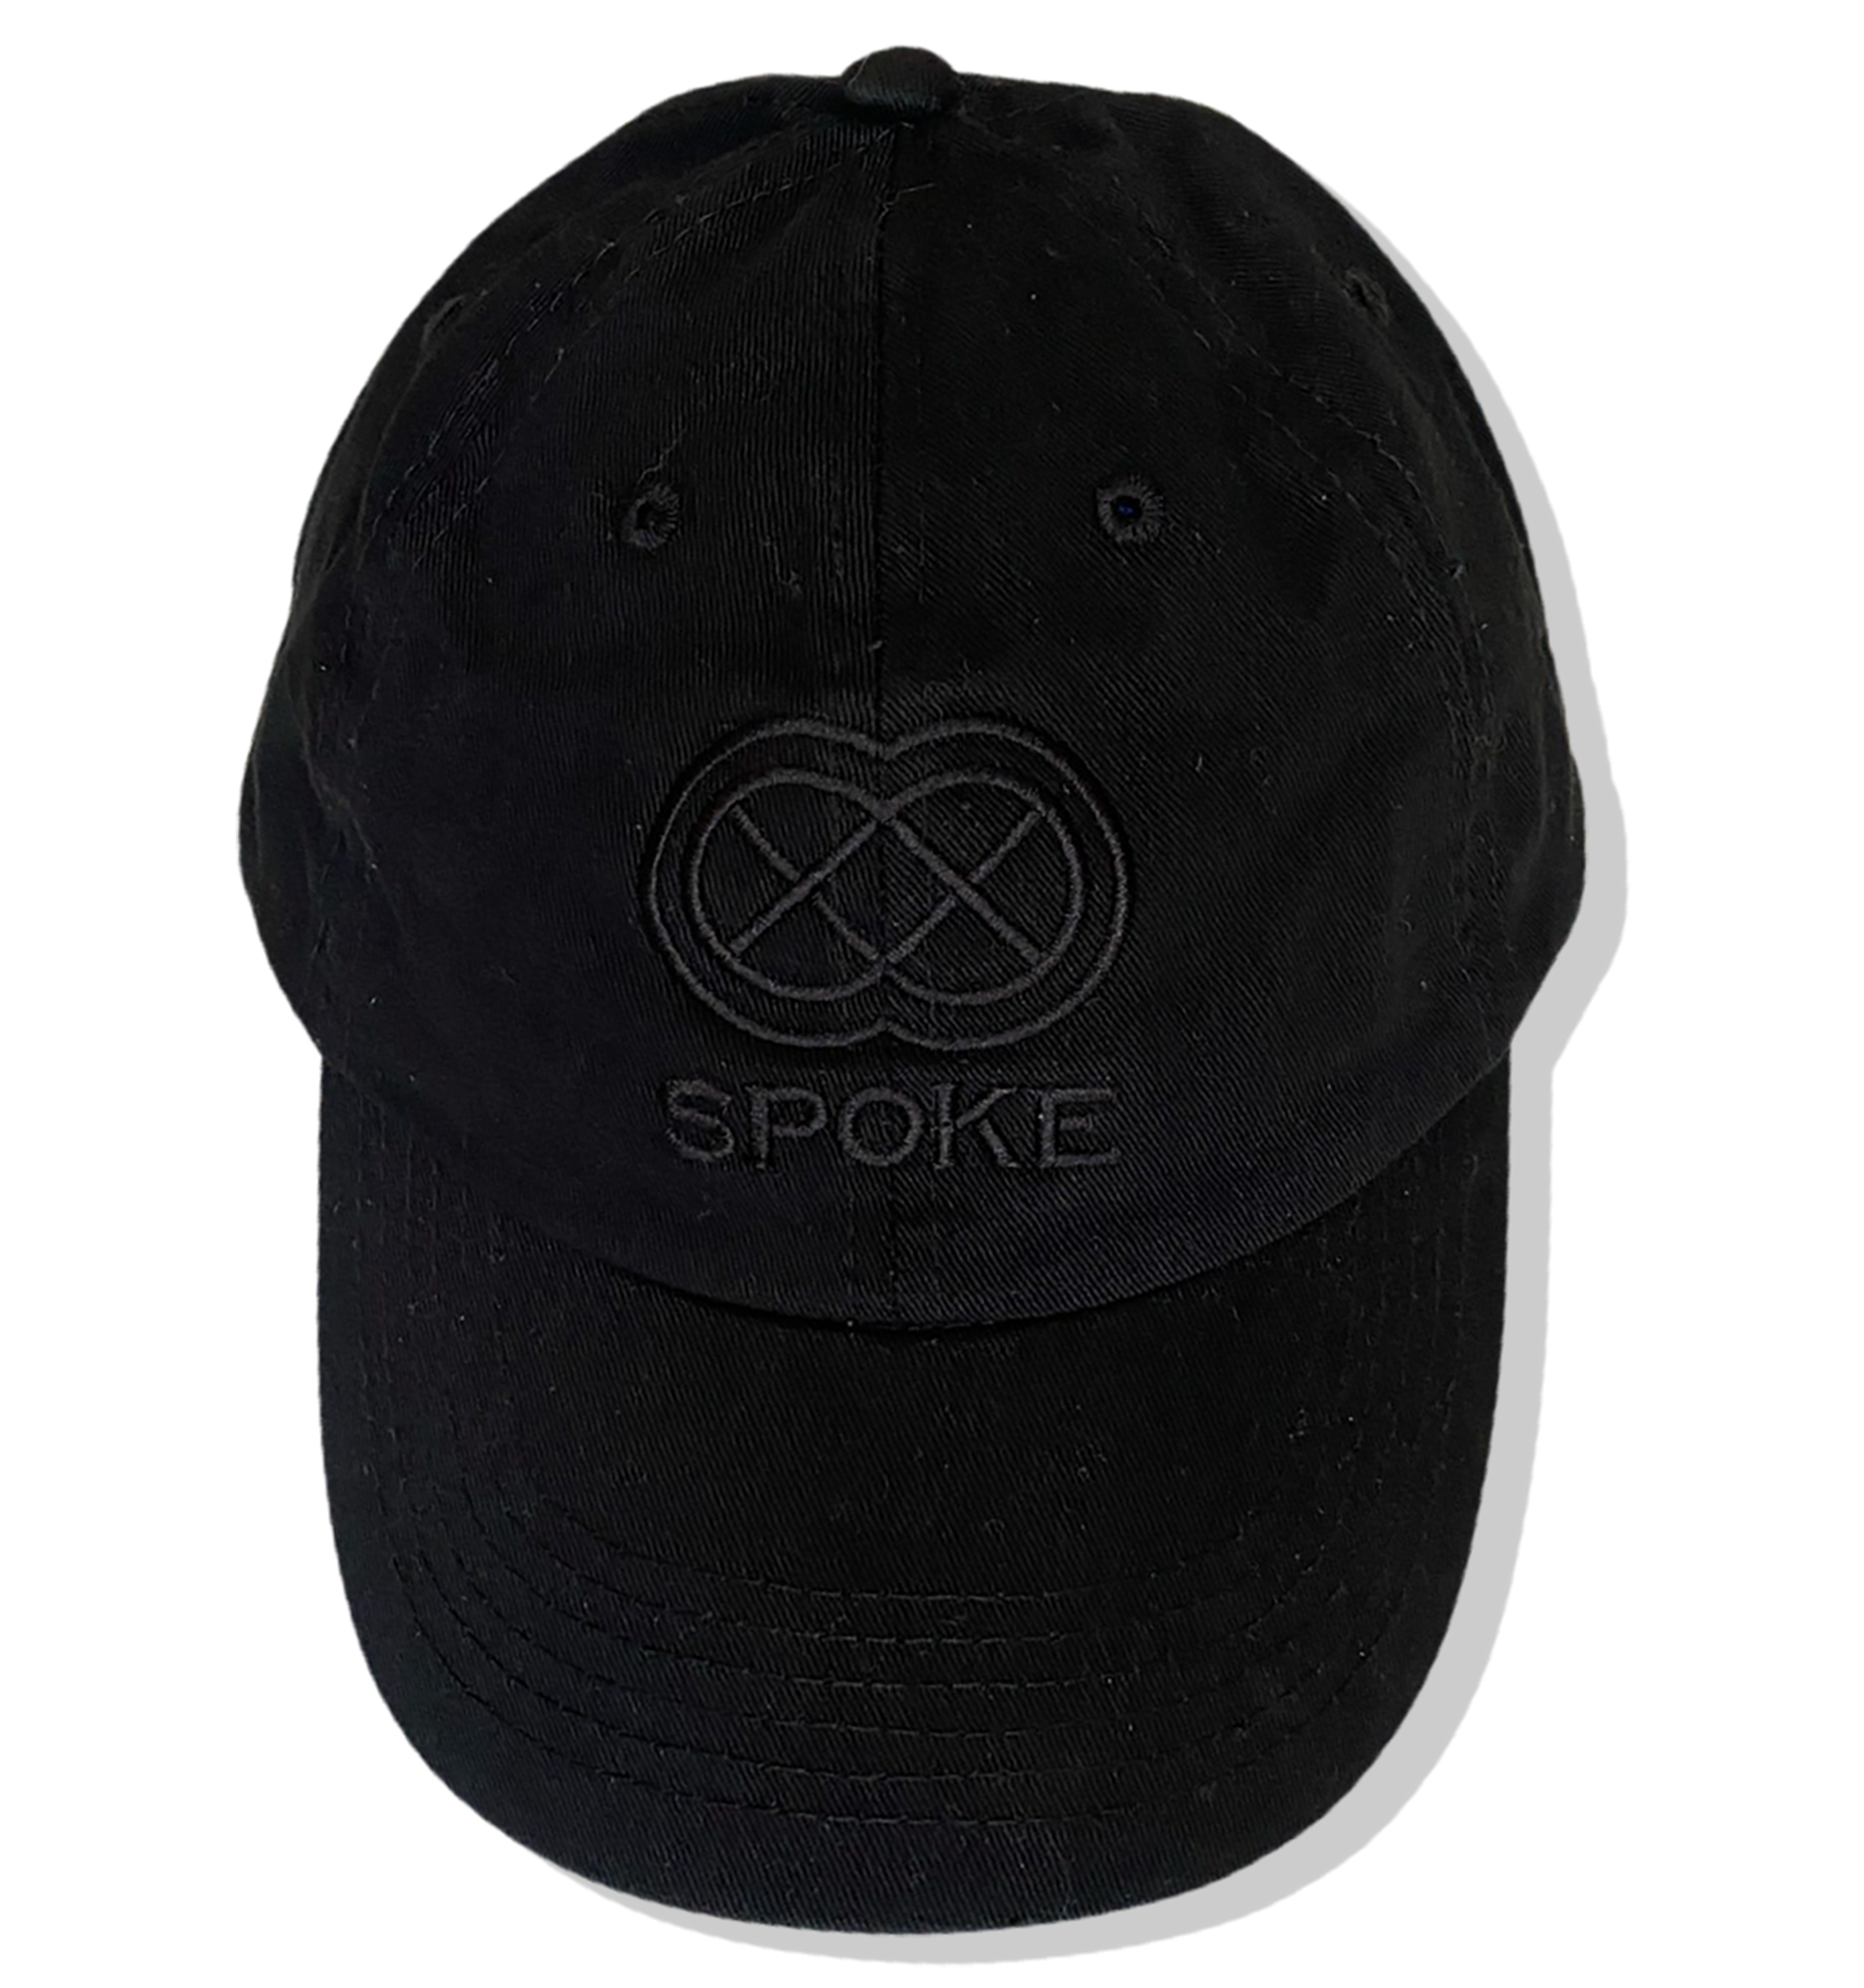 Spoke Black Embroidered Washed Chino Twill Cap